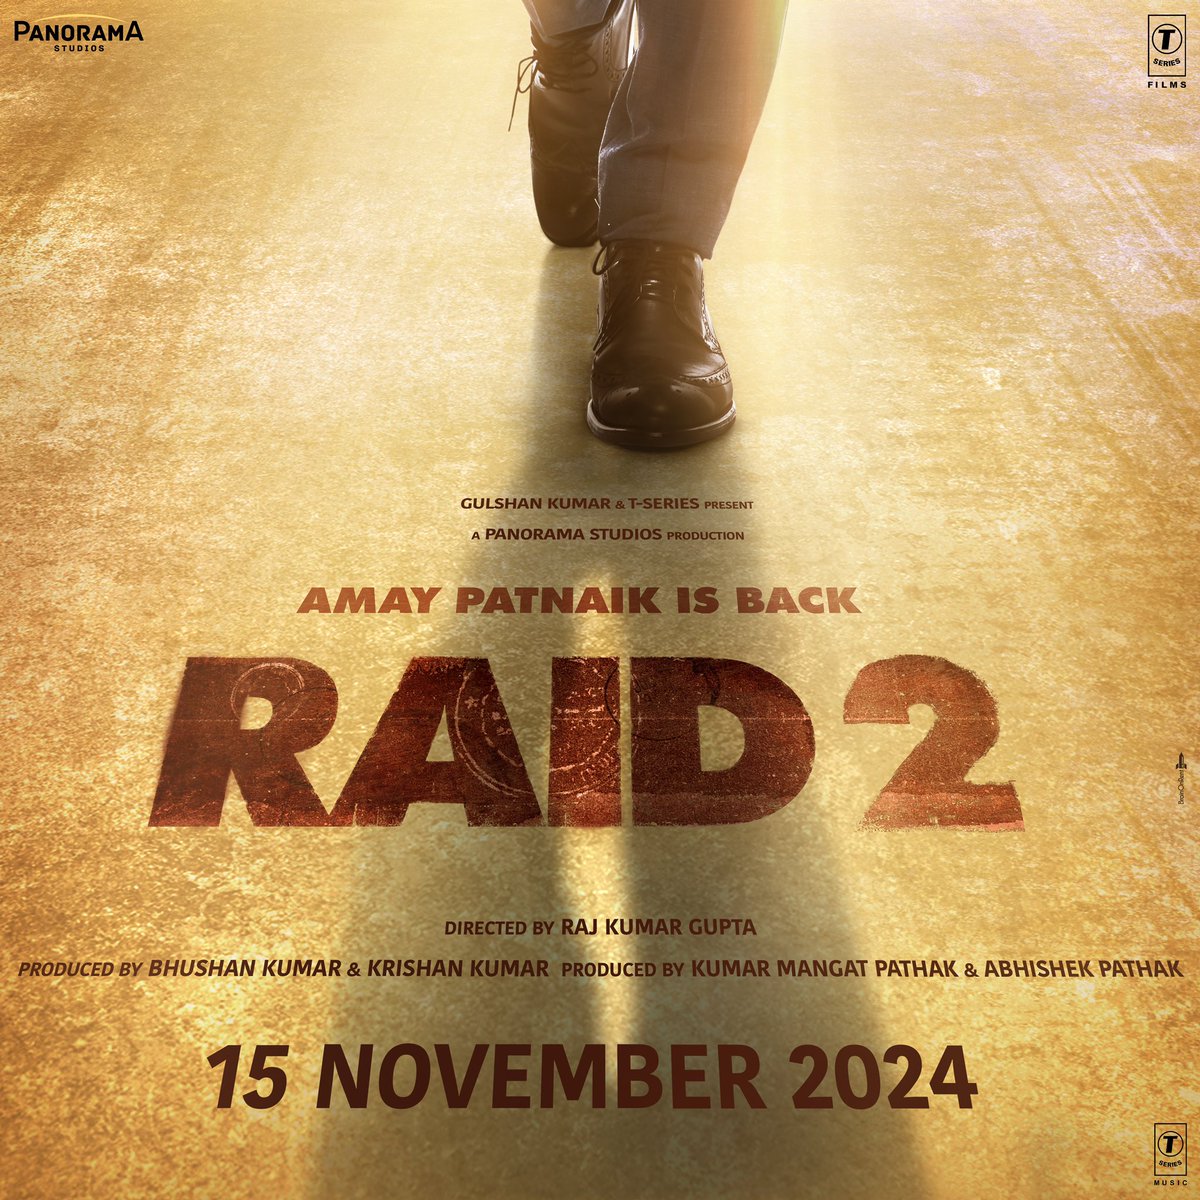 AJAY DEVGN: ‘RAID 2’ STARTS TODAY… 15 NOV 2024 RELEASE… #IRS Officer #AmayPatnaik is back… #AjayDevgn reunites with director #RajkumarGupta for #Raid2, the sequel to #Raid [2018].

The film commences shoot in #Mumbai today and will be extensively shot in #Mumbai, #Delhi, #UP…